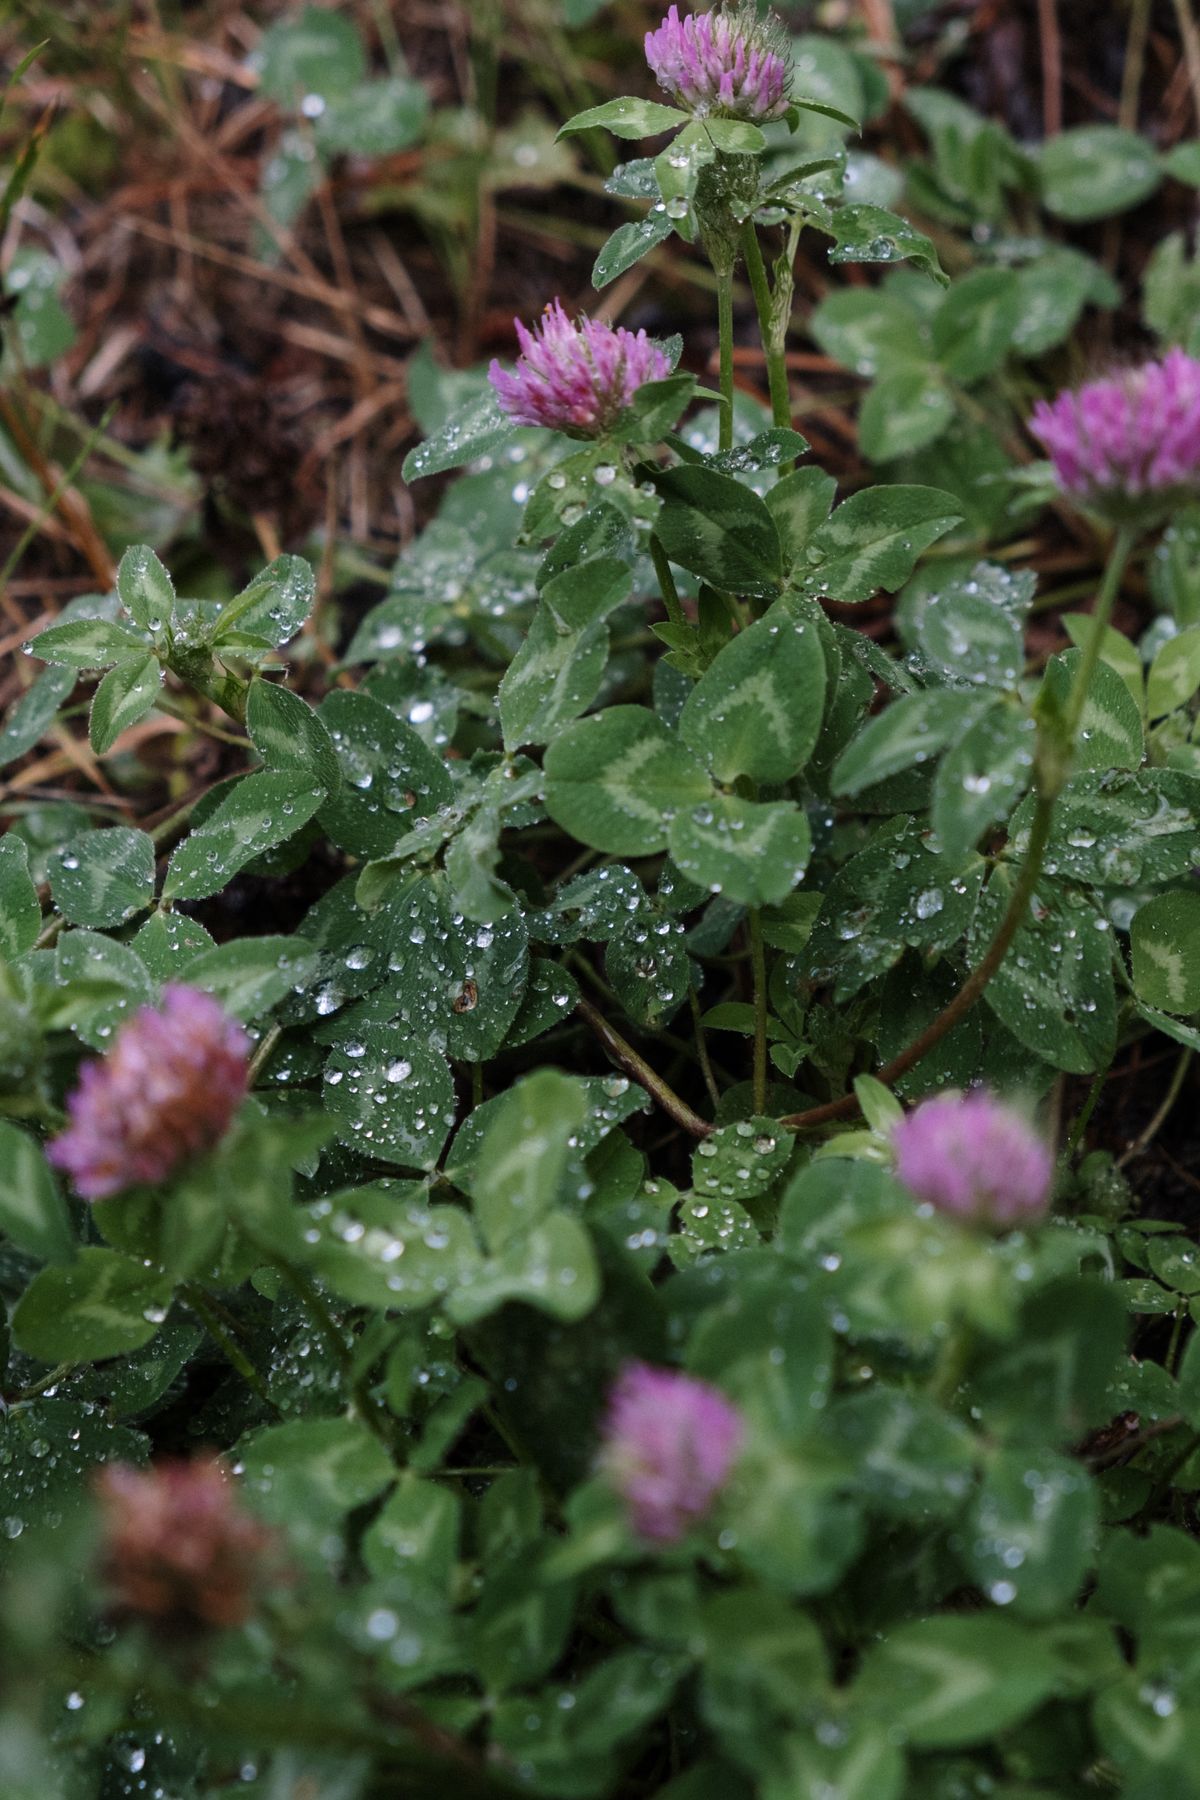 The Best Red Clover Supplements to Help Relieve Menopause Symptoms